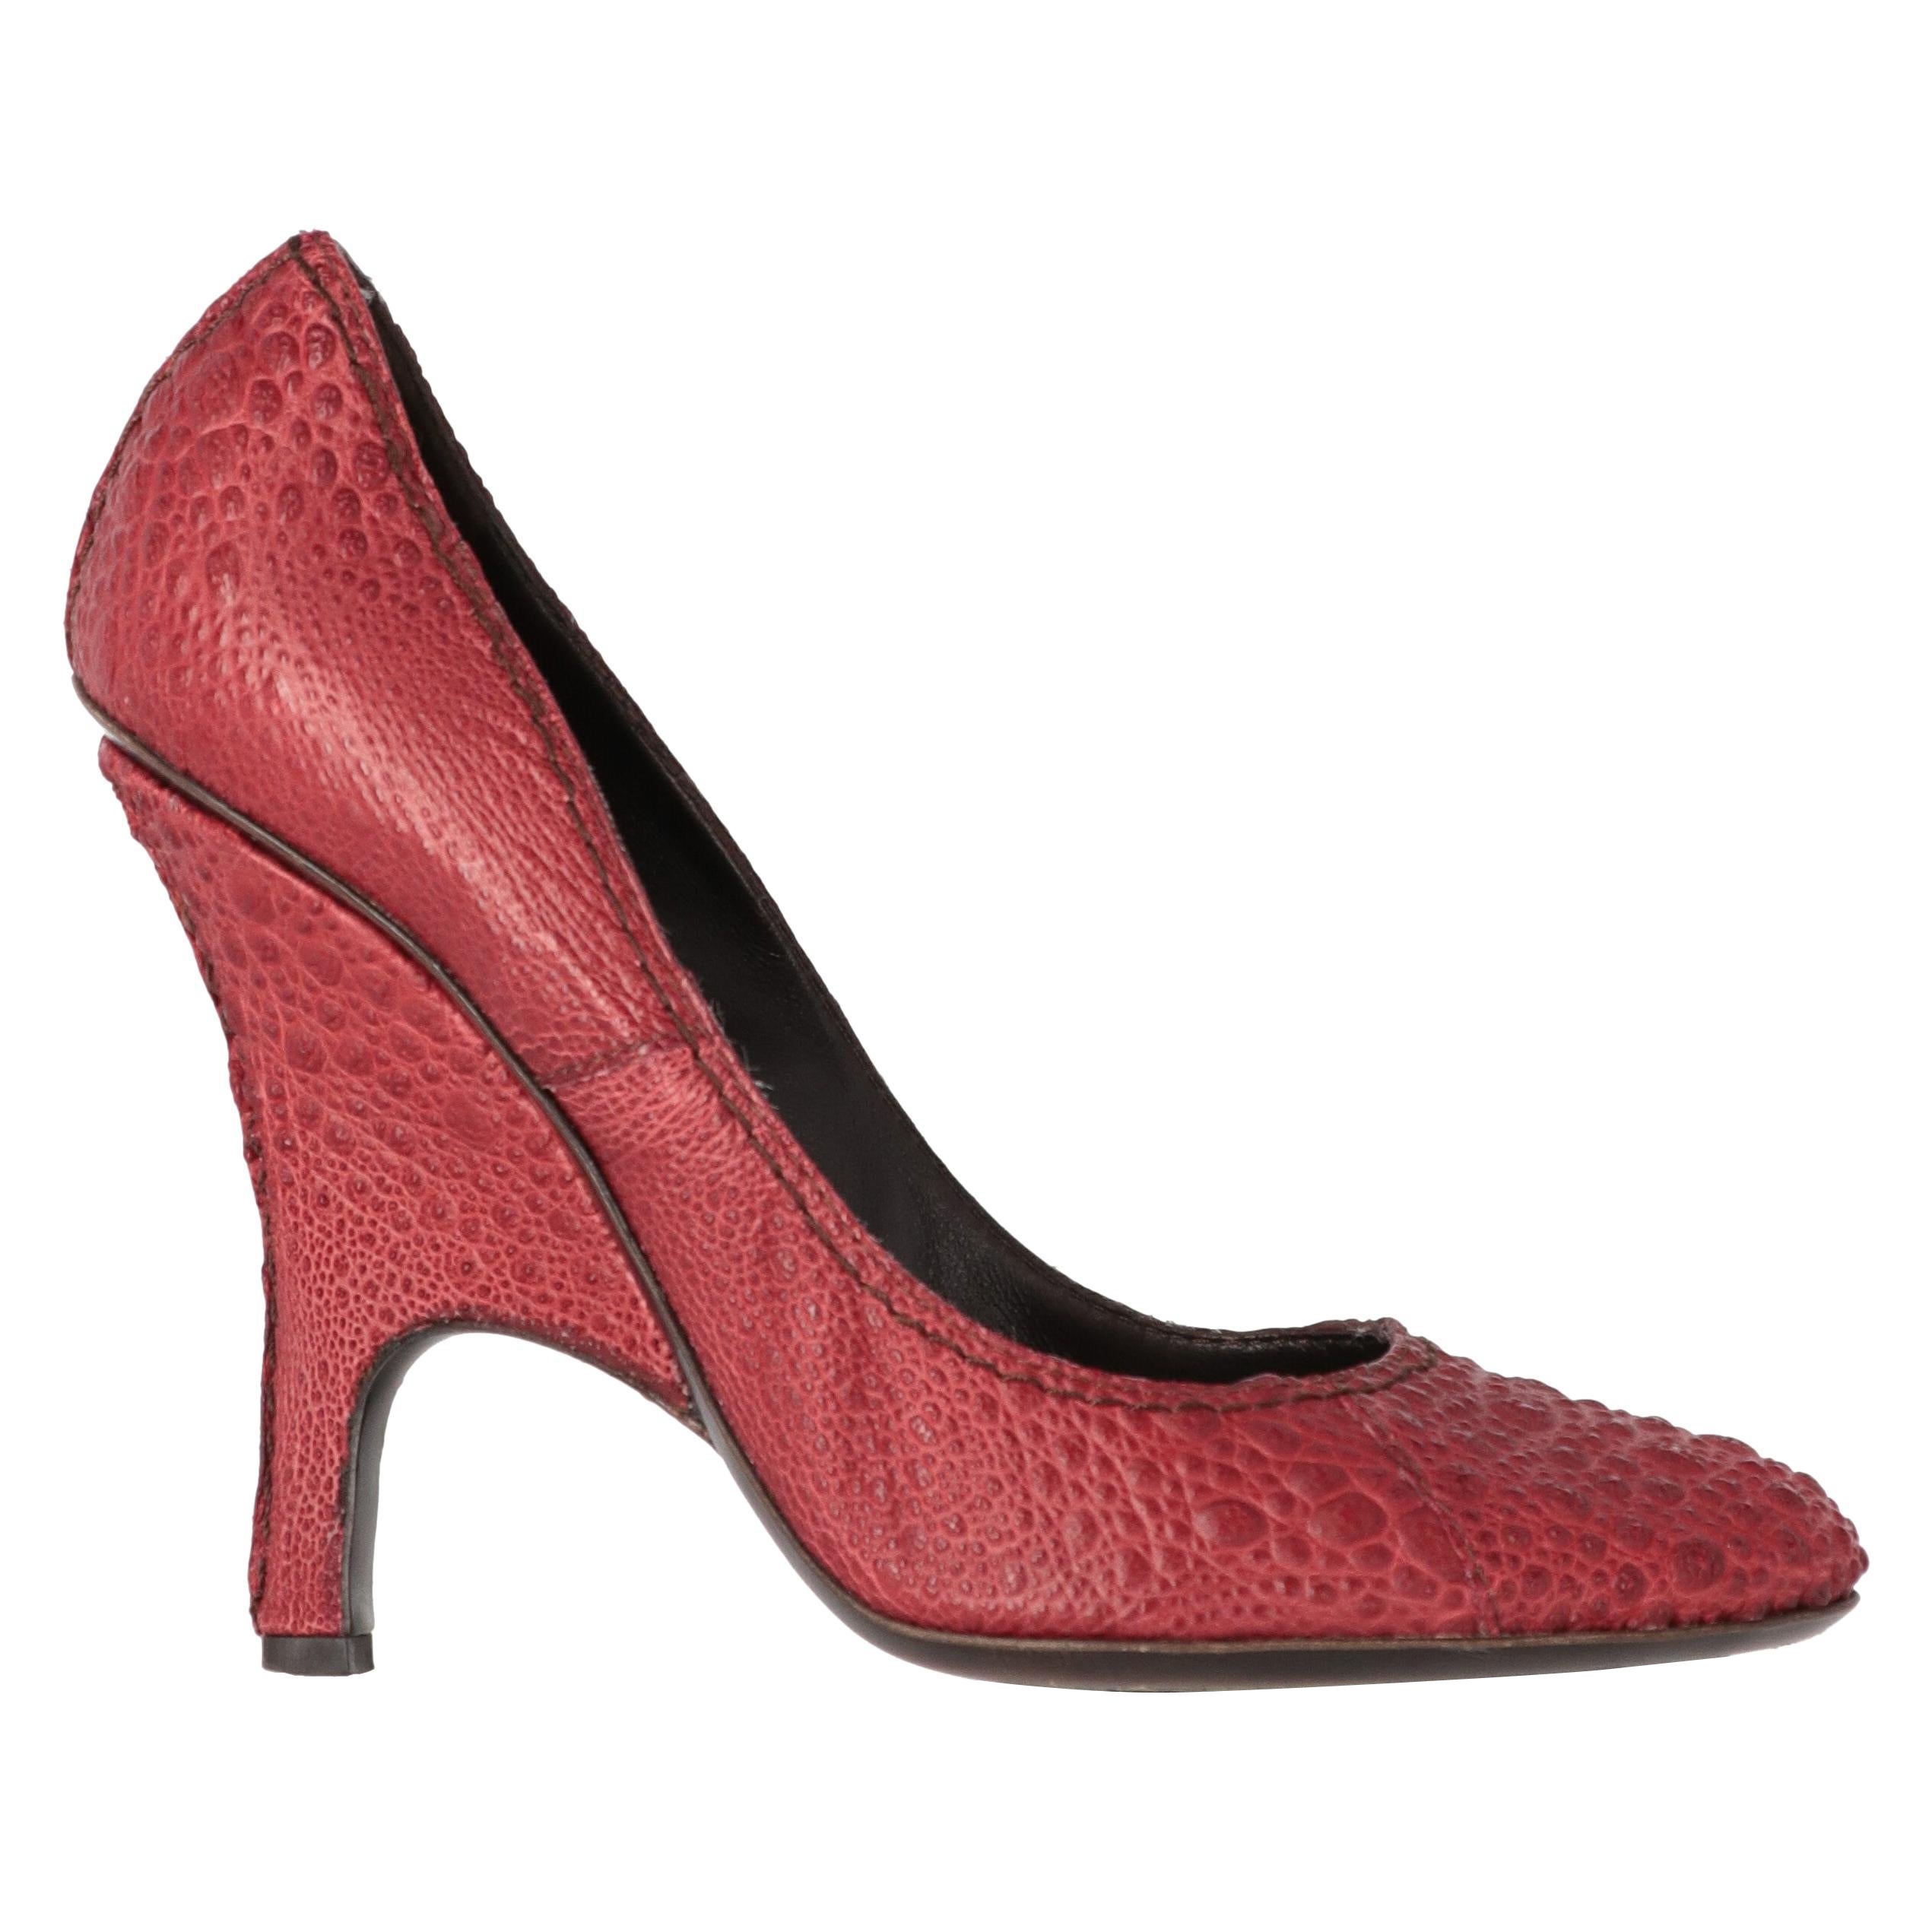 2000s Gianfranco Ferré Vintage Red Leather Pumps with Crocodile Effect For Sale